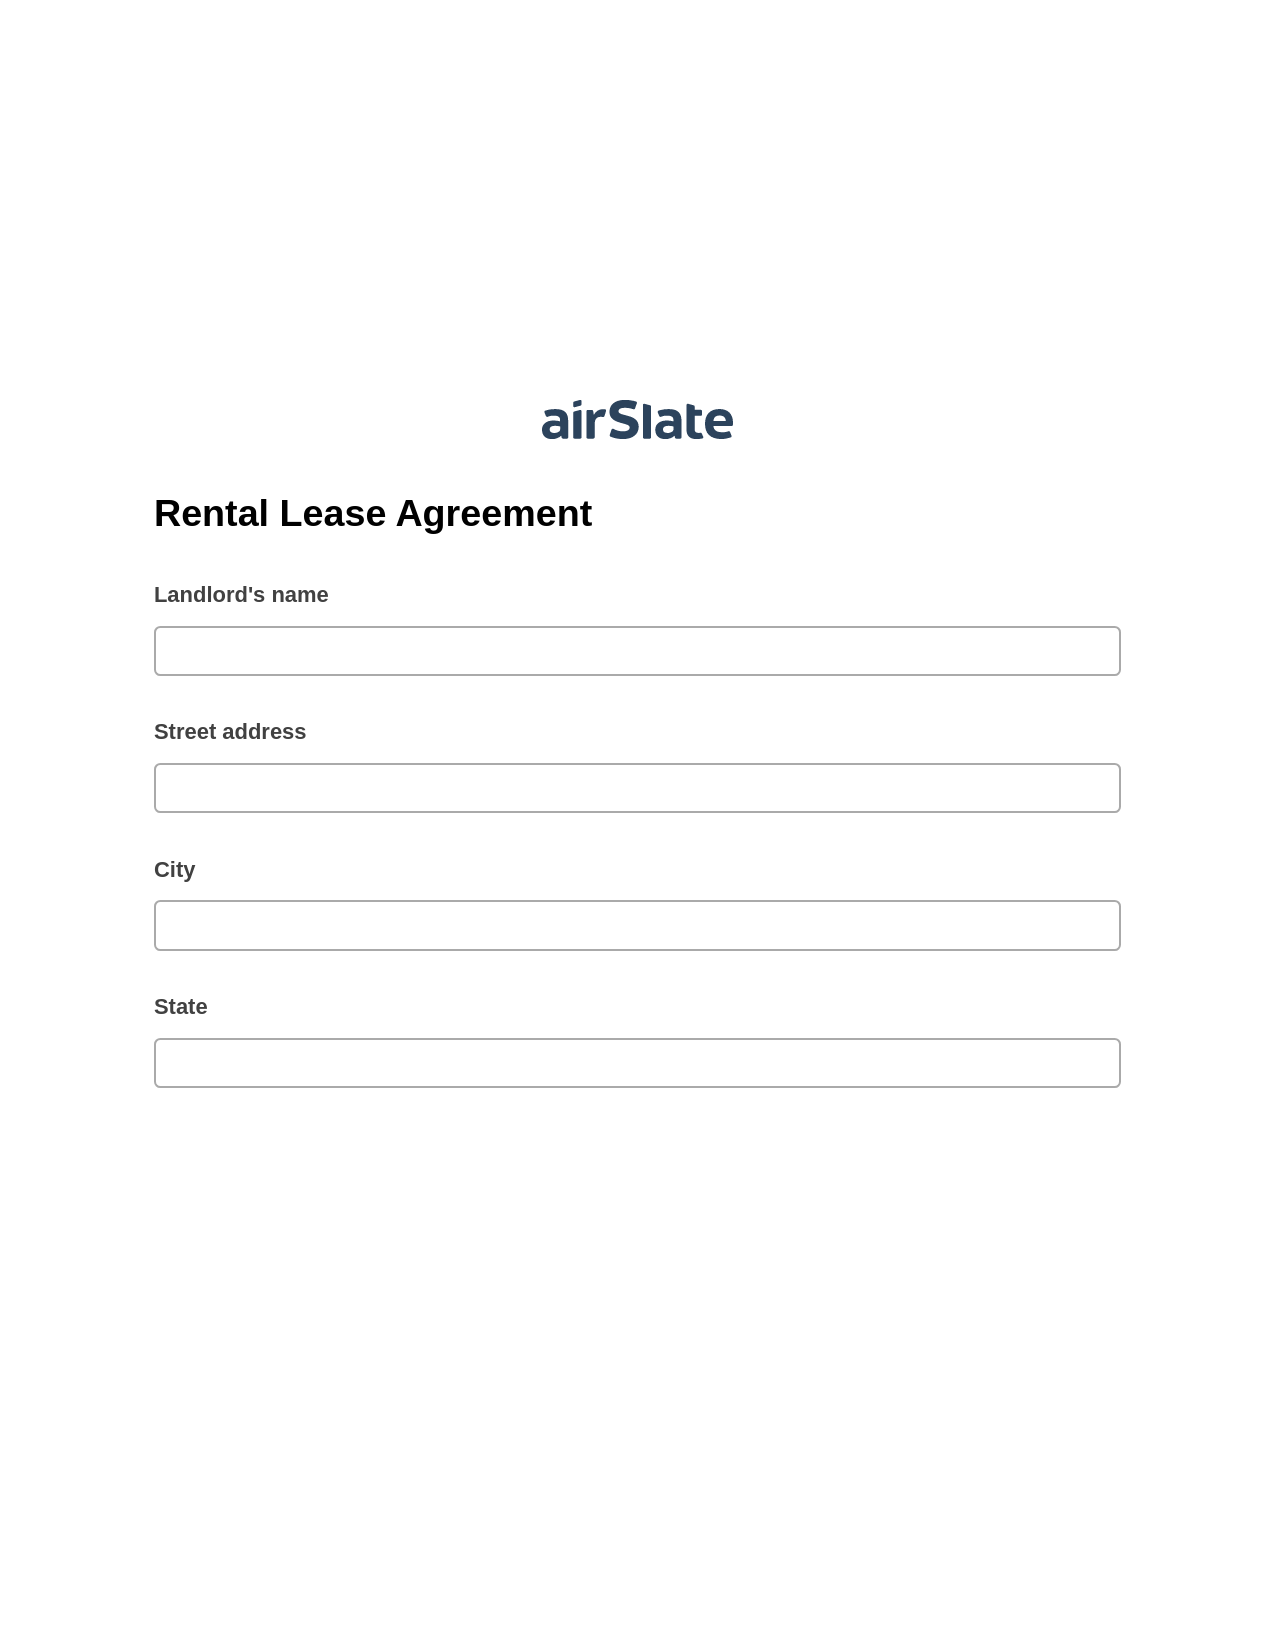 Multirole Rental Lease Agreement Pre-fill from CSV File Bot, Google Cloud Print Bot, Post-finish Document Bot